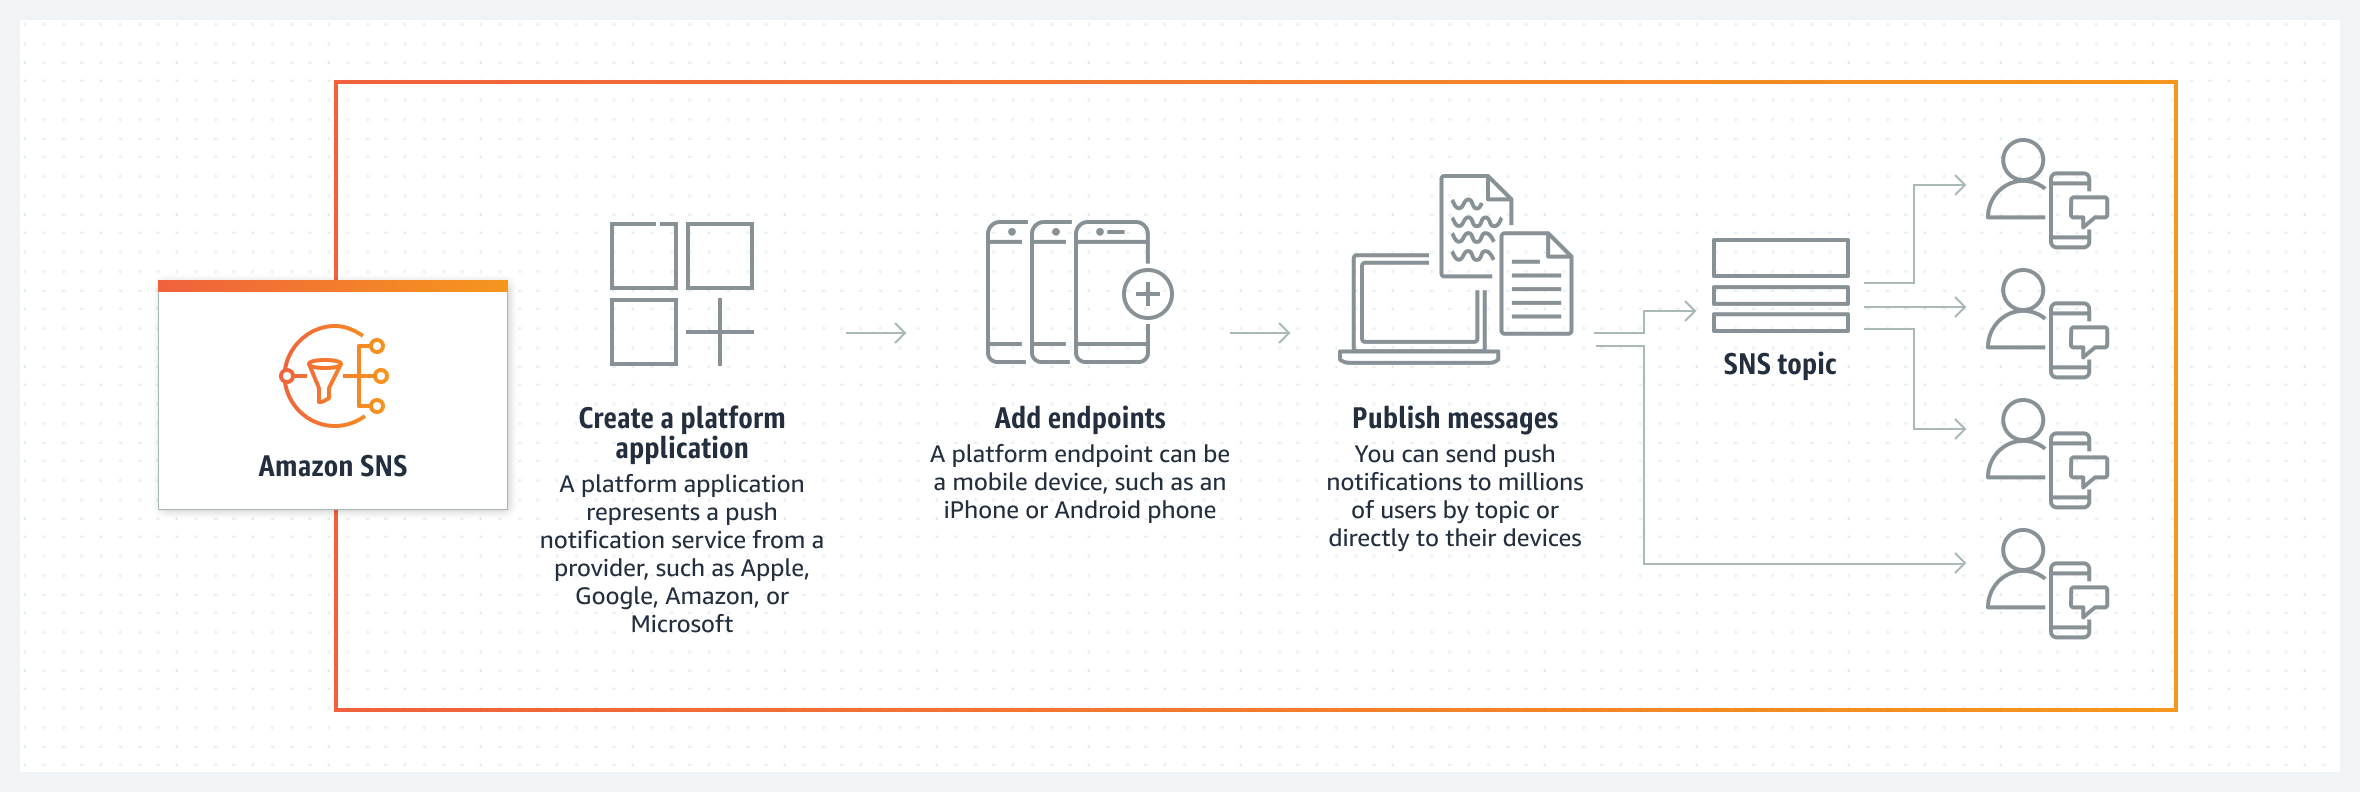 Diagram shows how Amazon SNS lets you publish mobile push notifications to users directly or by SNS topic. 